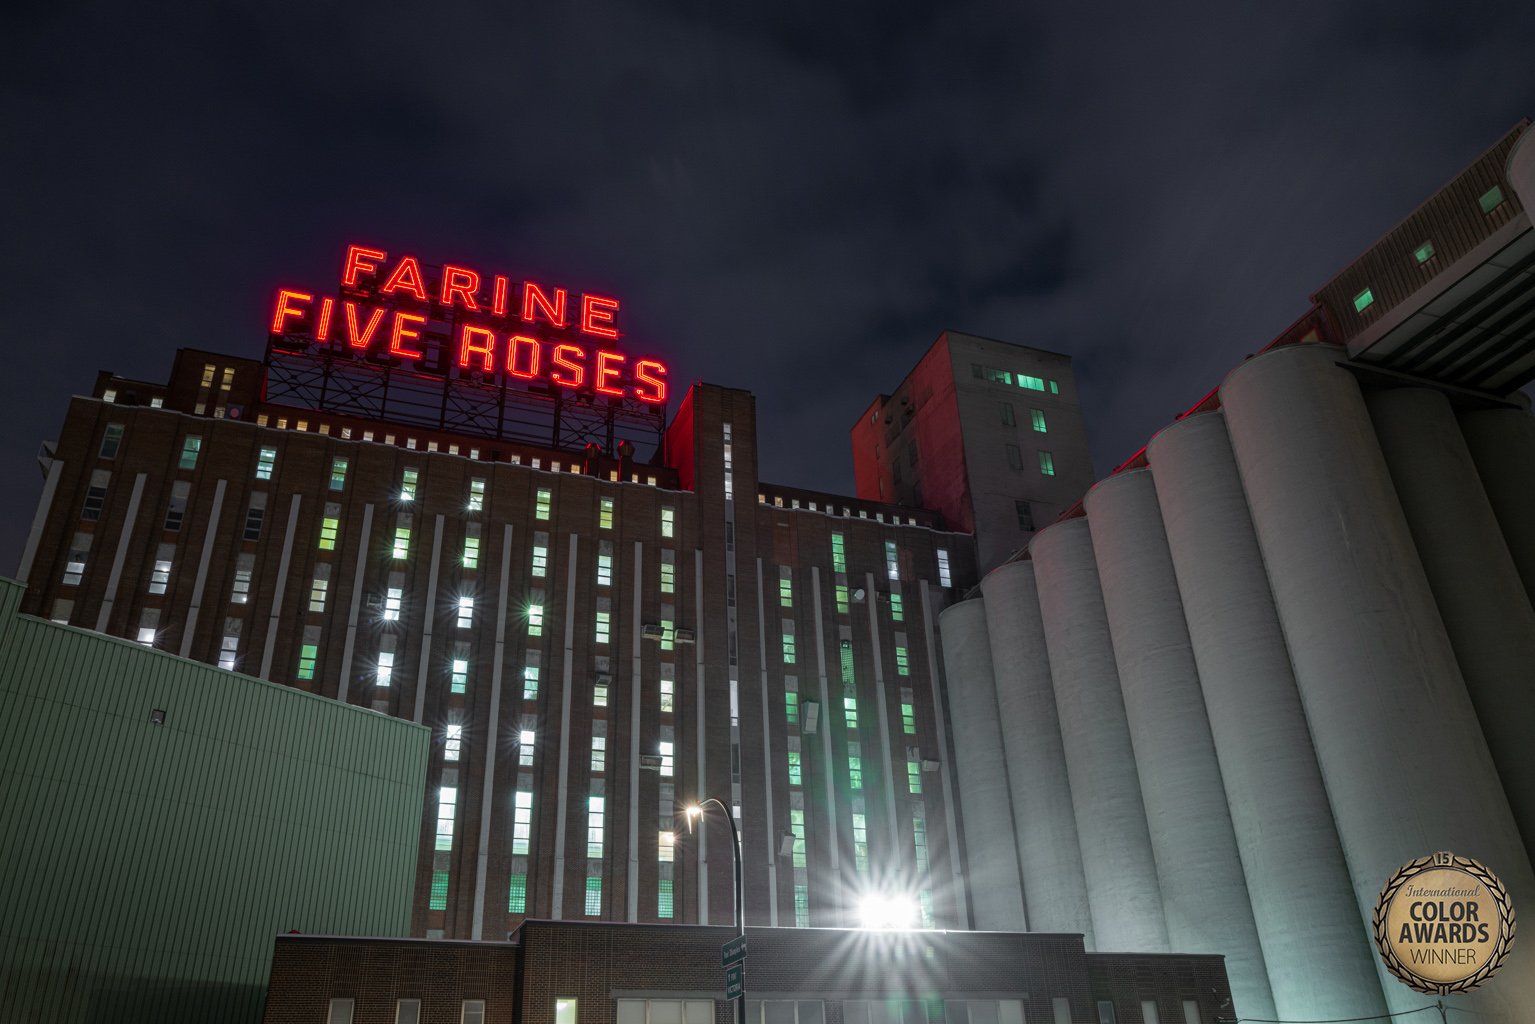 Five Roses Lights  (Portfolio  "Cityscapes") - 15th International Color Awards  (2022)  in Architecture category